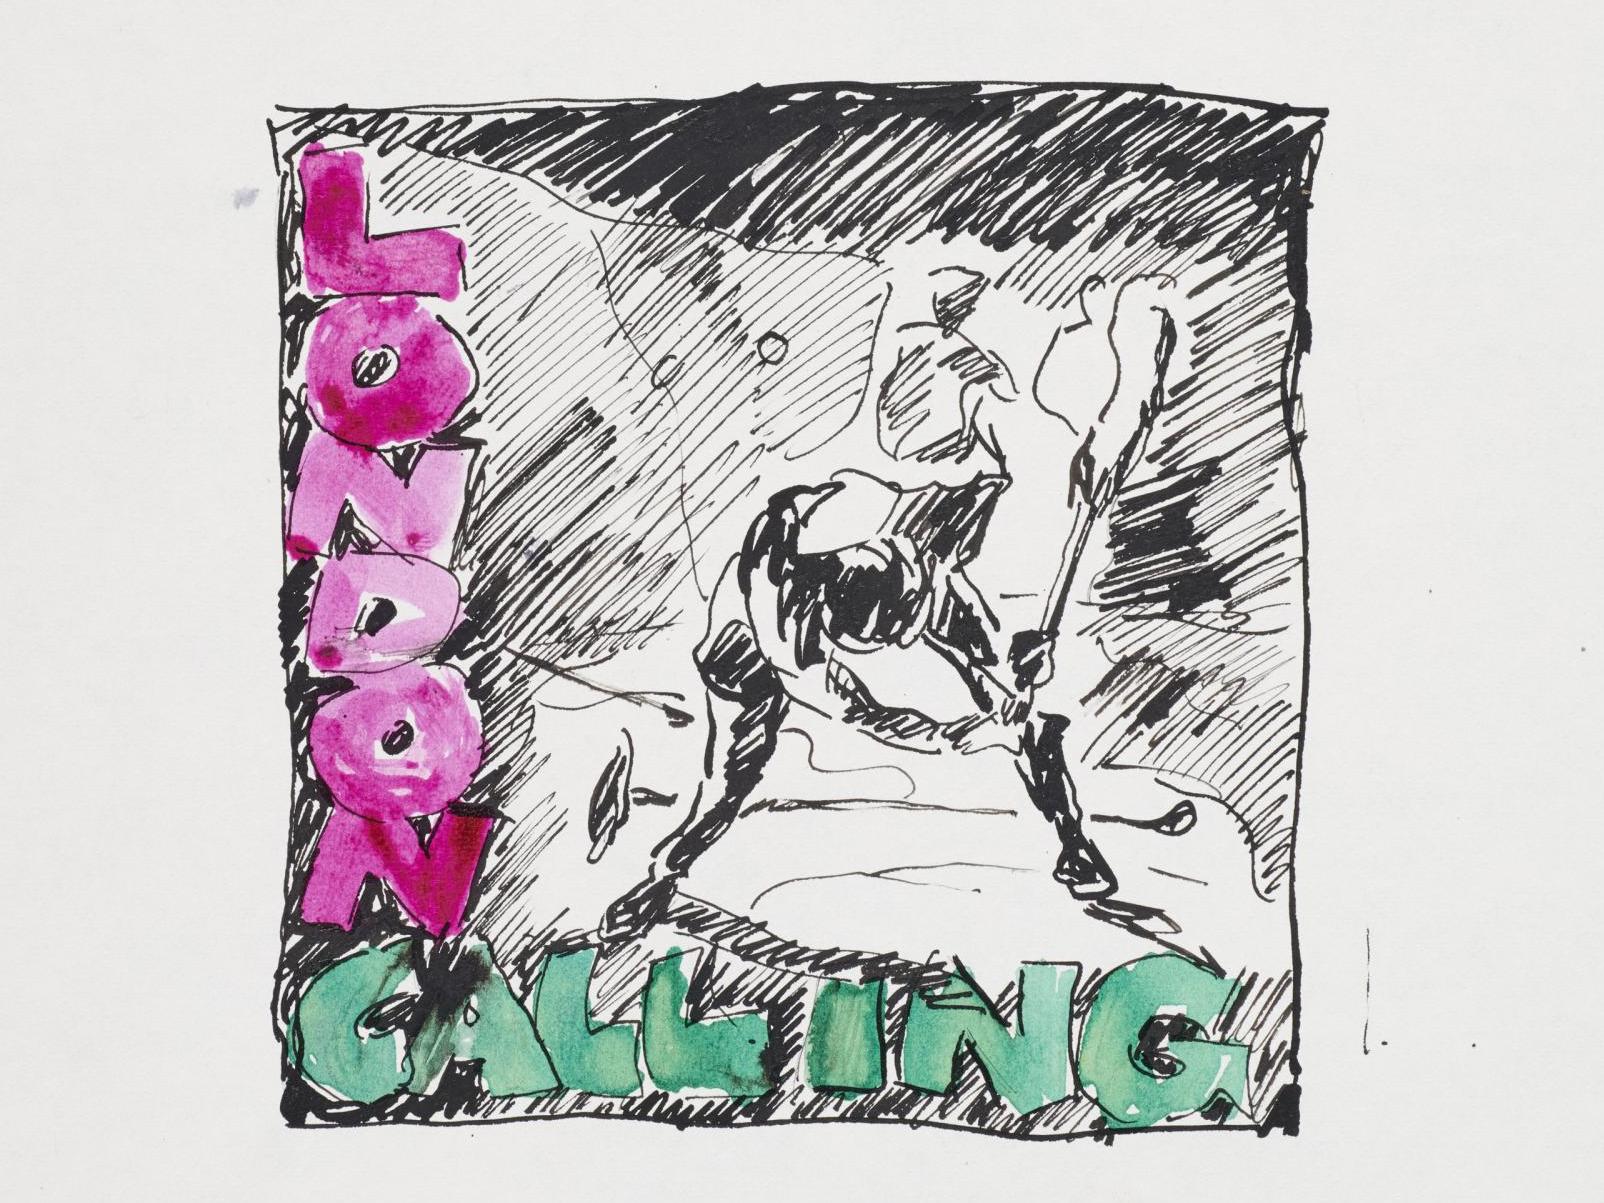 A 1979 preliminary sketch by Ray Lowry for the ‘London Calling’ album art, on display at the Museum of London